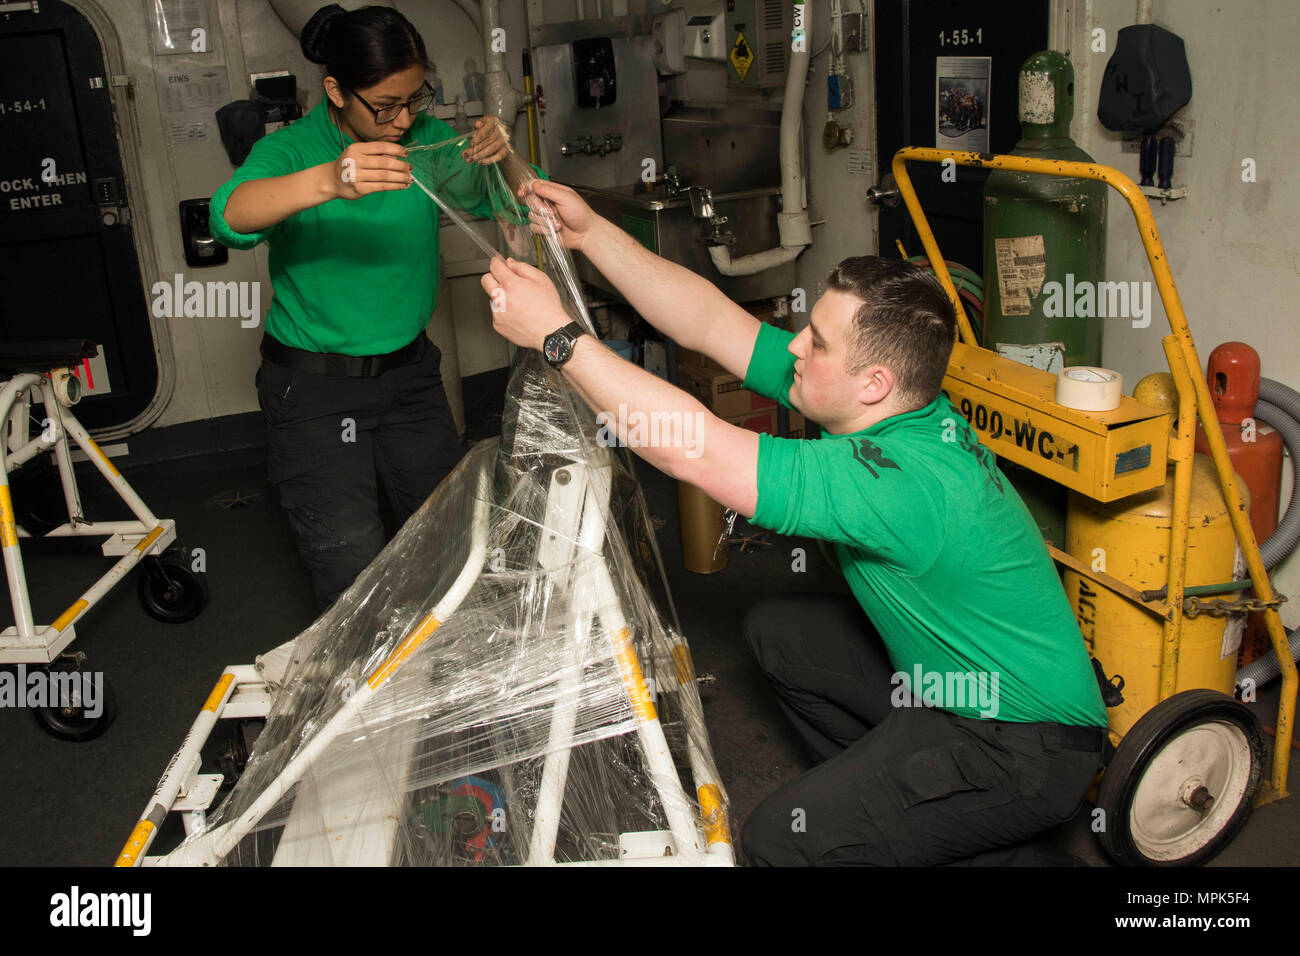 170322-N-KJ380-028  ATLANTIC OCEAN (March 22, 2017) Aviation Support Equiment Technician Airman Maya Condori, left, from Youngstown, Ohio, and Aviation Support Equipment Technician 3rd Class Adam Curry, from Halfmoon, N.Y., wrap equipment for preservation in the Aviation Intermediate Maintenance Department tunnel aboard the aircraft carrier USS Dwight D. Eisenhower (CVN 69) (Ike). Ike is currently conducting aircraft carrier qualifications during the sustainment phase of the Optimized Fleet Response Plan (OFRP). (U.S. Navy photo by Mass Communication Specialist Seaman Neo Greene III) Stock Photo